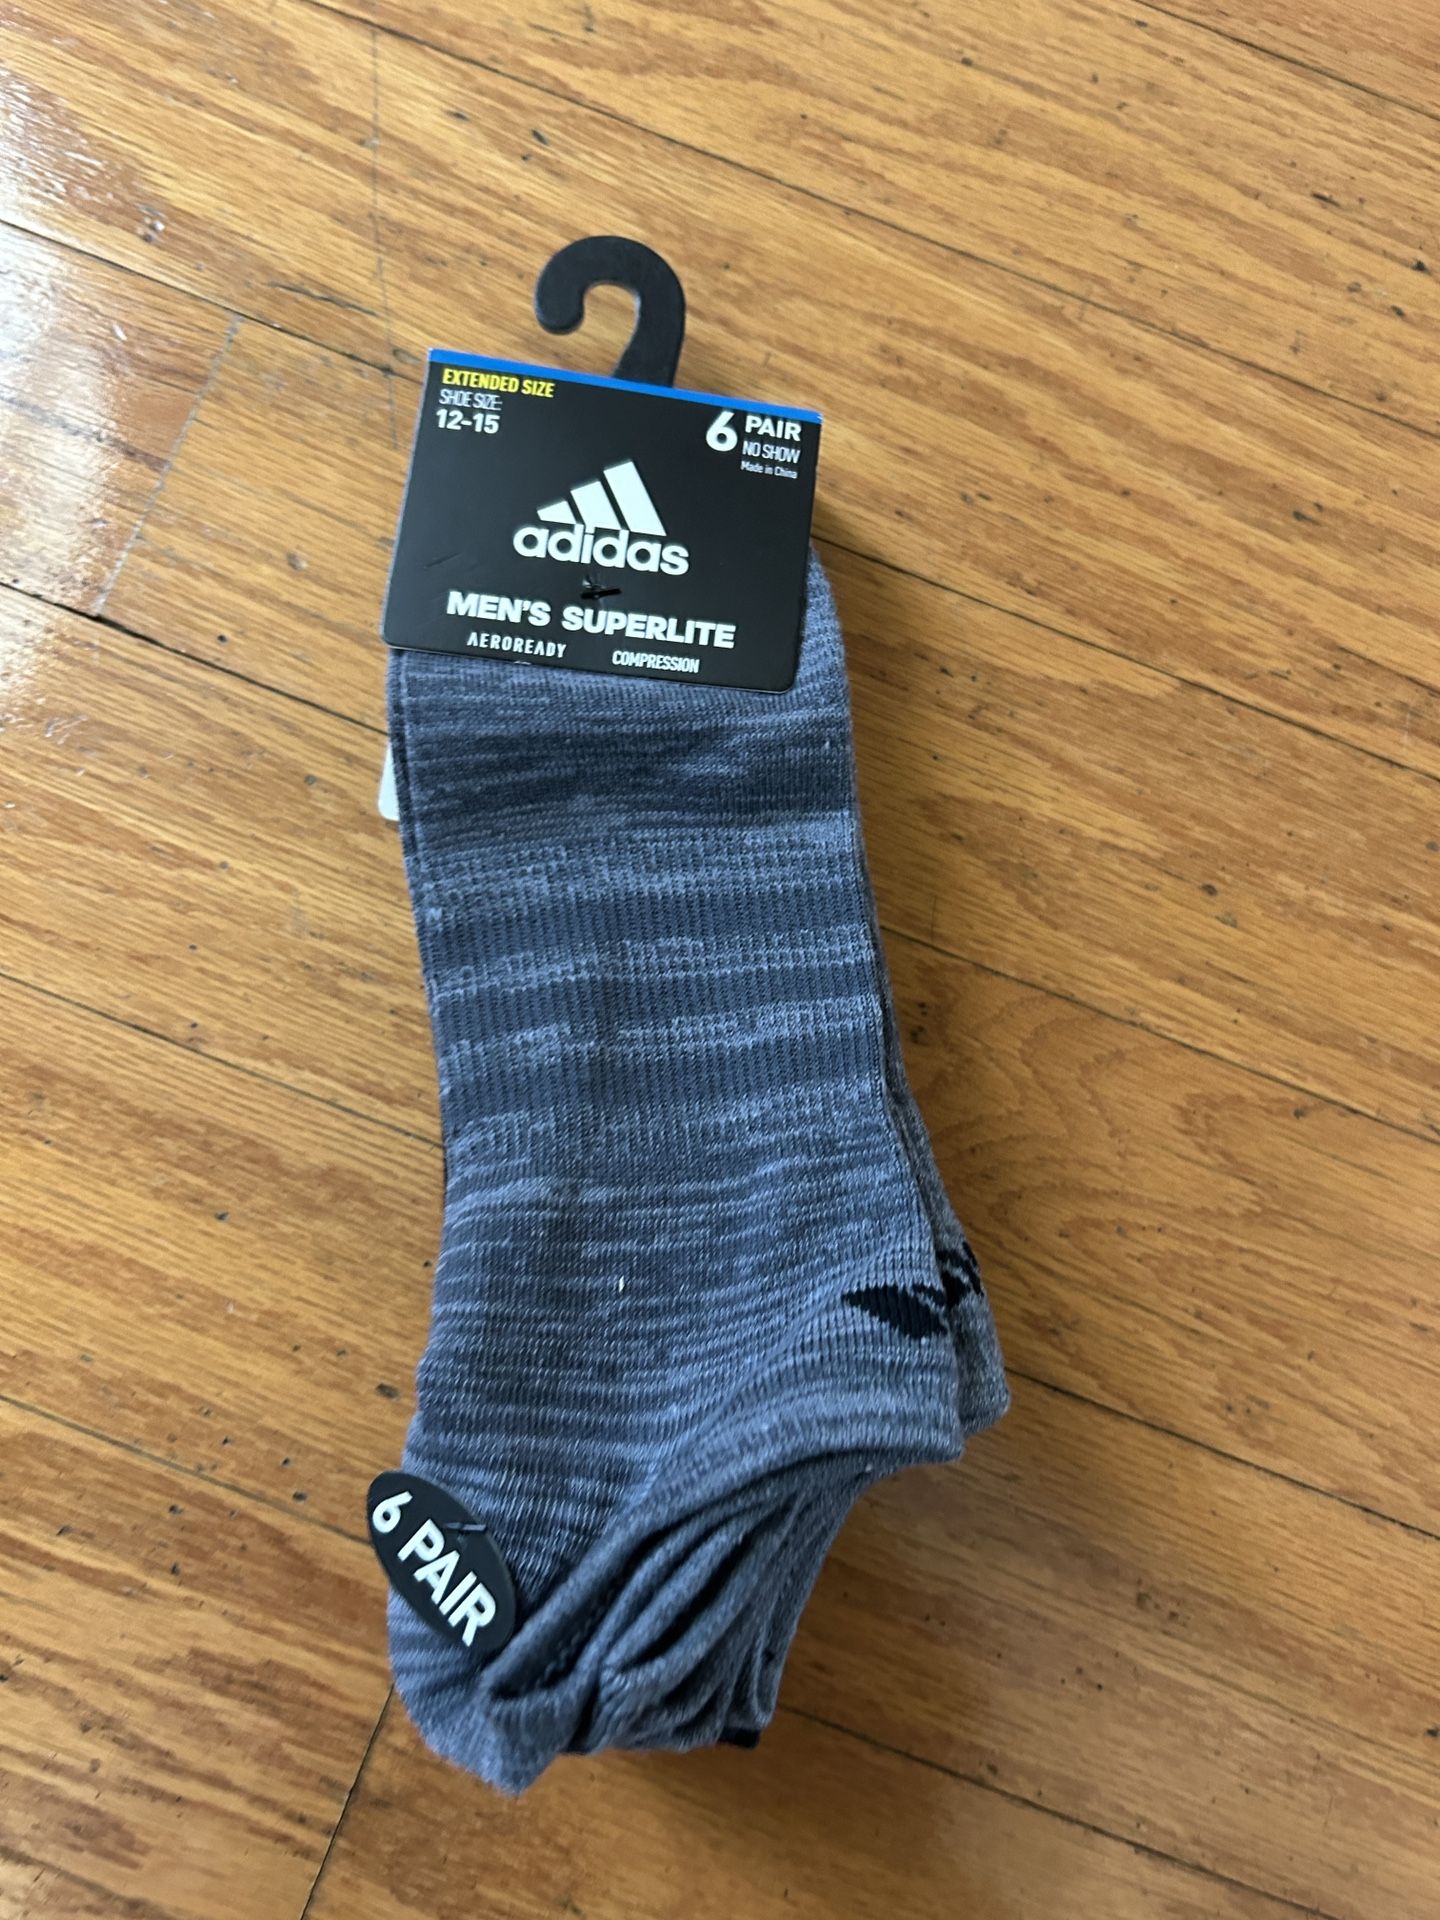 NWT Adidas Men’s Superlite Extended Size Socks 6 Pairs 